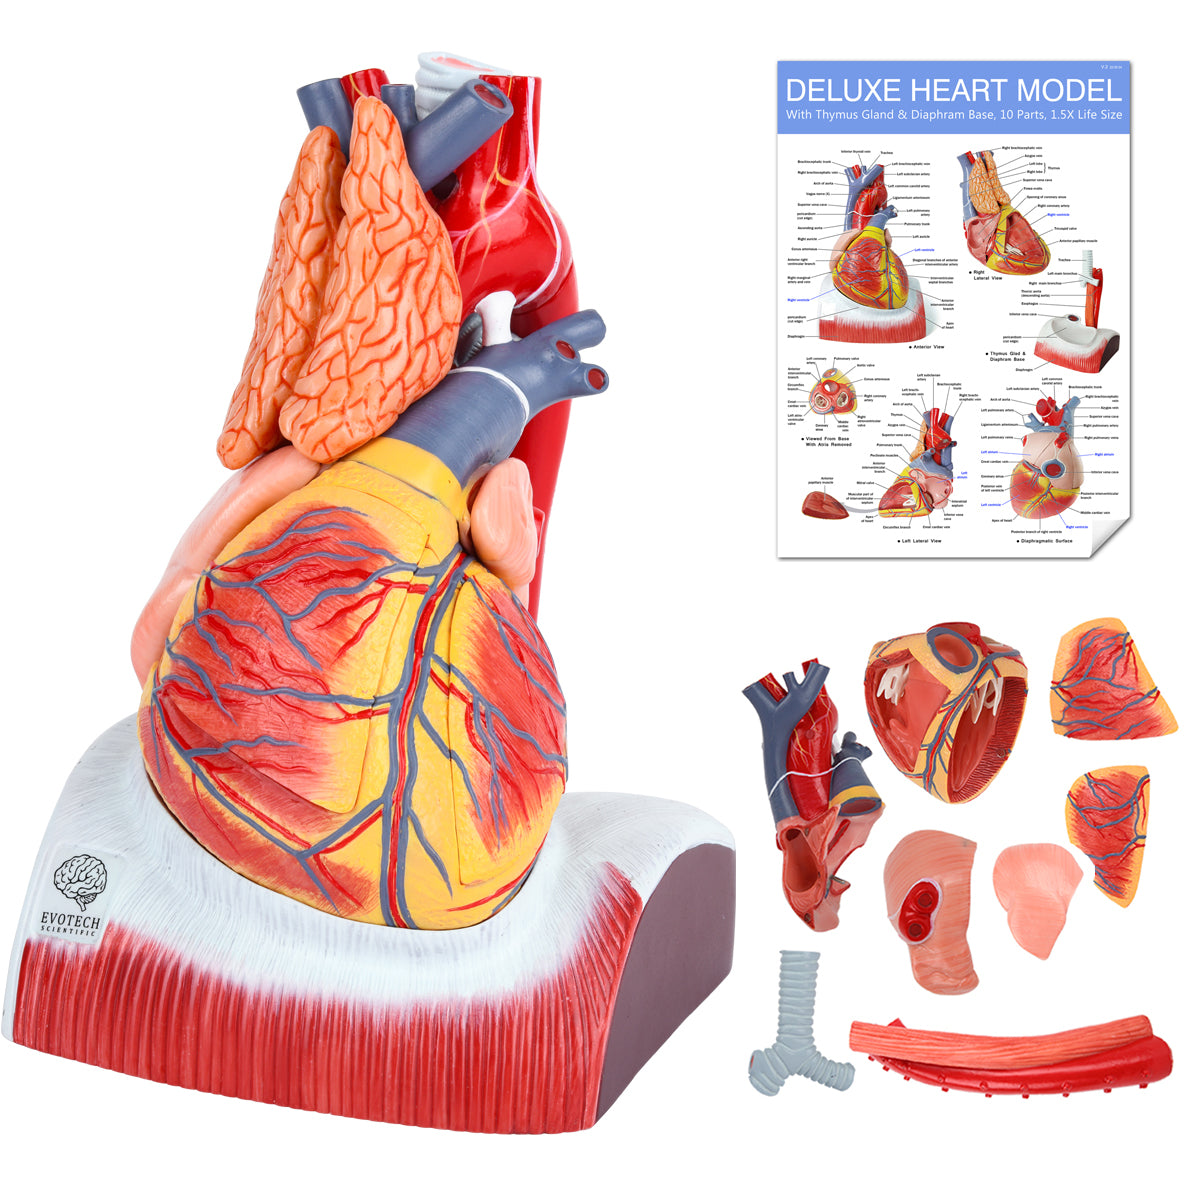 Evotech Scientific Deluxe 10 Parts 1.5X Life Size Large Human Anatomical Heart Model with Thymus Gland & Diaphram Base